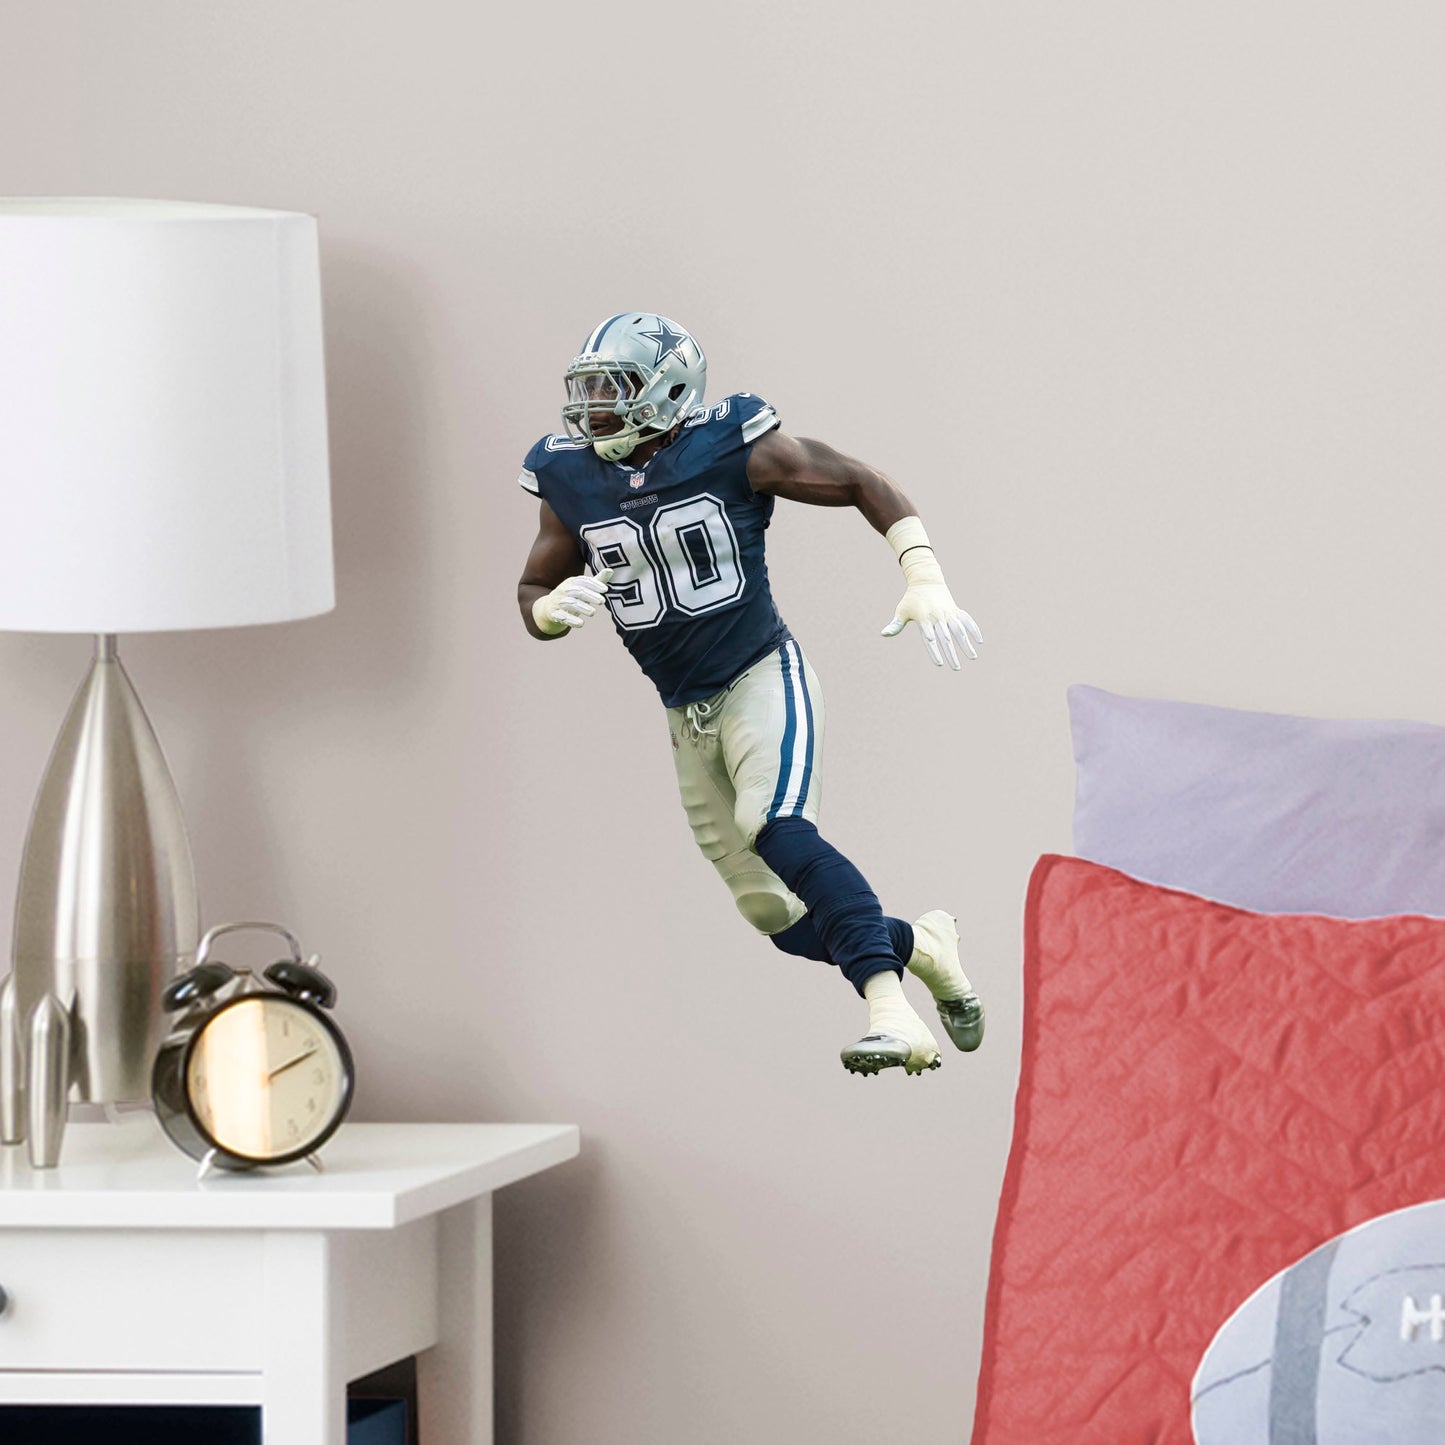 Large Athlete + 2 Decals (10"W x 16"H) Show your support for one of the best defensive linemen in the NFL with this reusable DeMarcus Lawrence wall decal! This two-time Pro Bowler is quickly climbing his way up the all-time sacks list and is already one of the all-time great Dallas Cowboys players. This high-quality decal can be easily applied, removed, and reused so your support for DeMarcus Lawrence can follow you wherever you go!